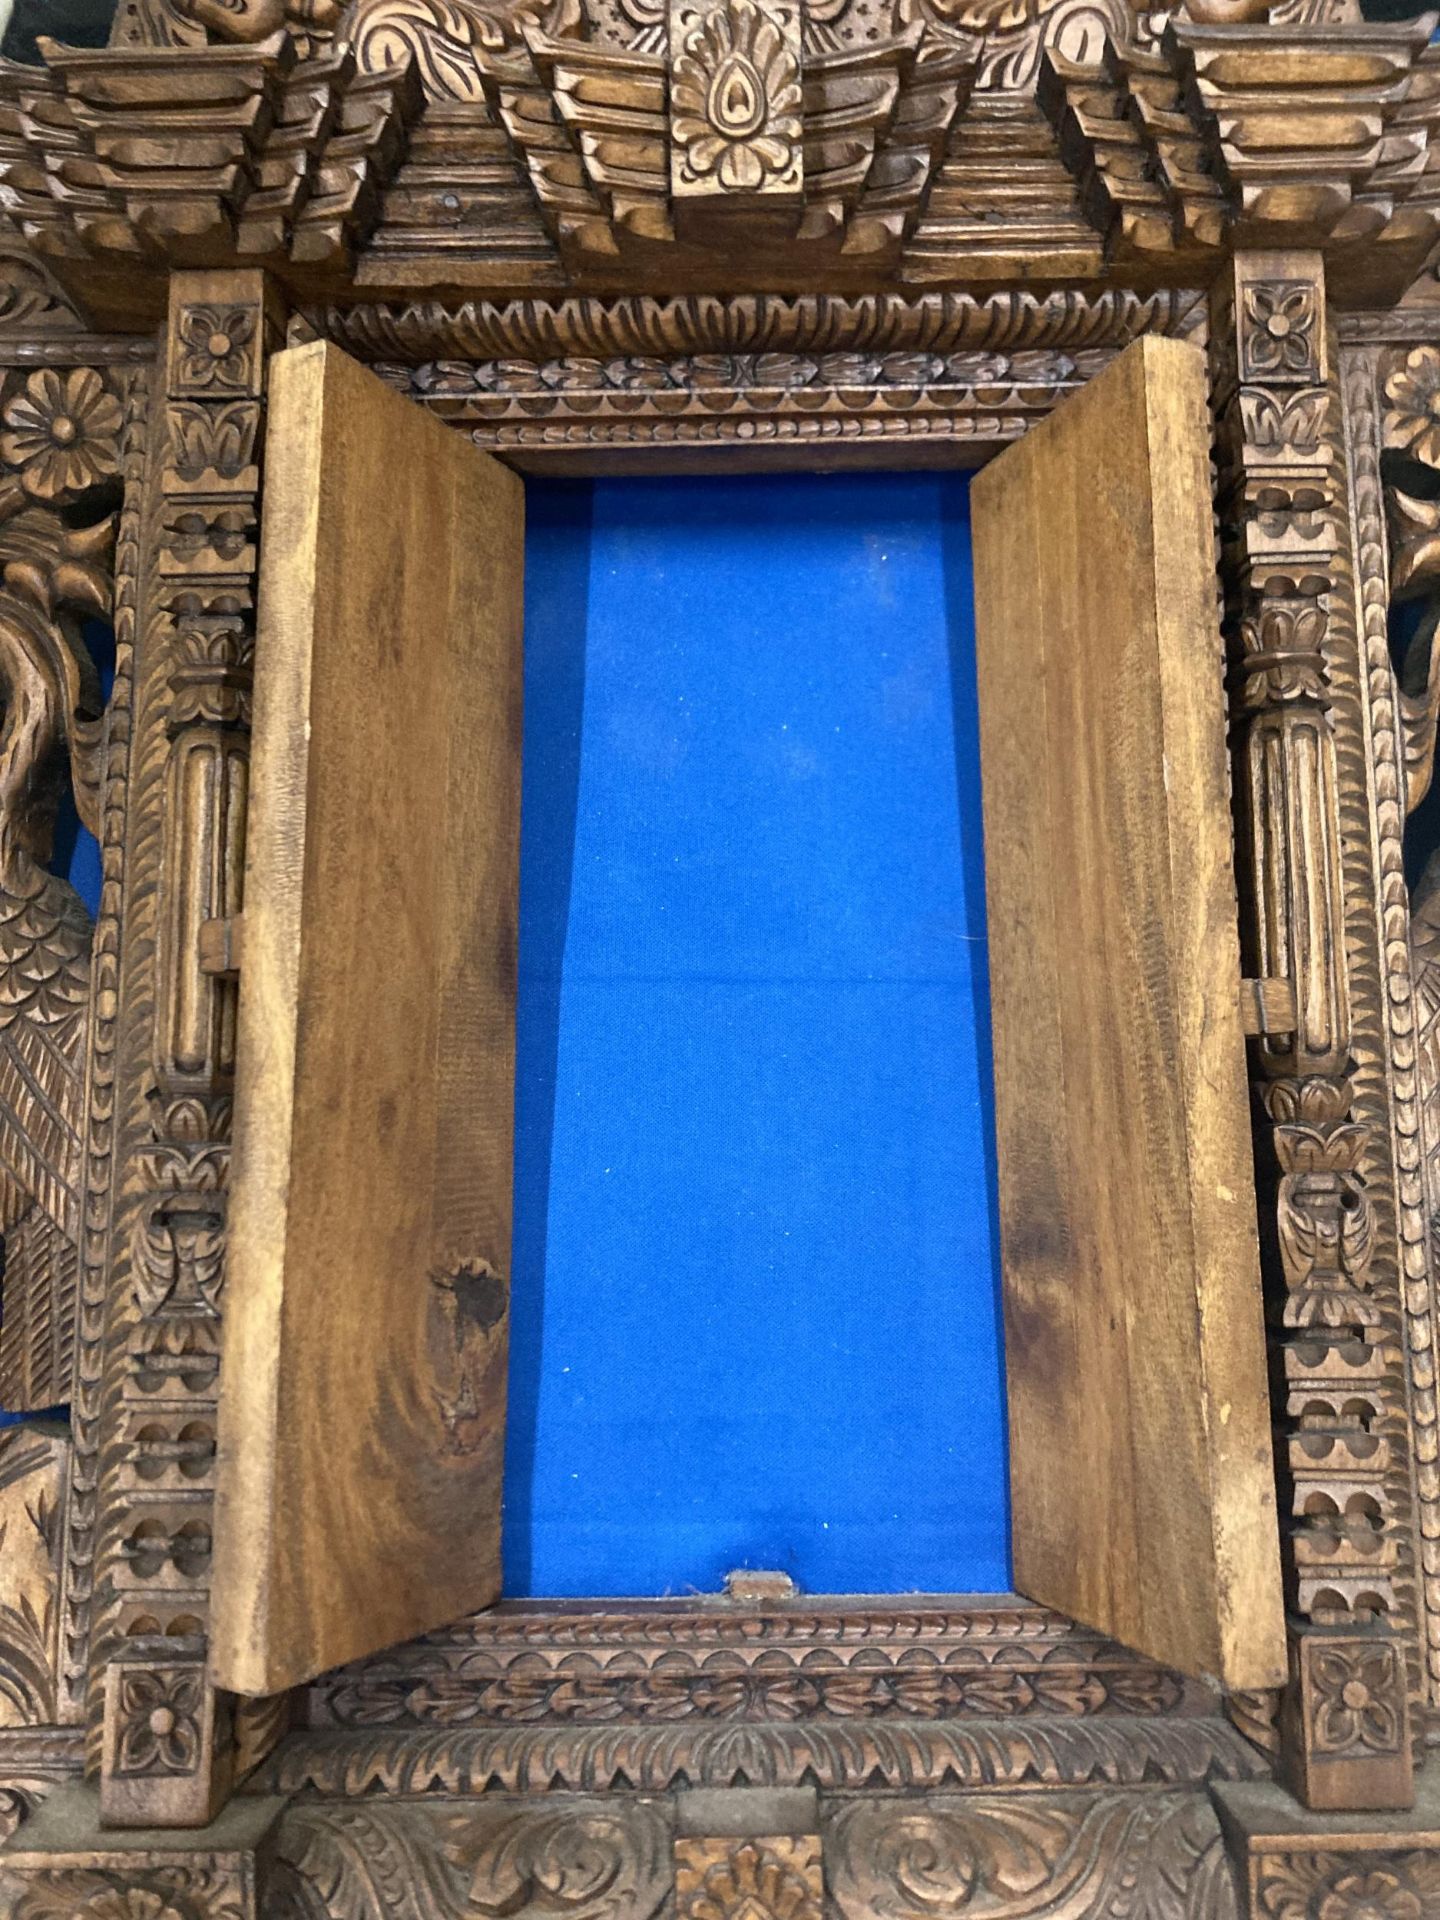 A HEAVILY CARVED ASTAMANGAL DOOR FRAME WALL HANGING - Image 4 of 5